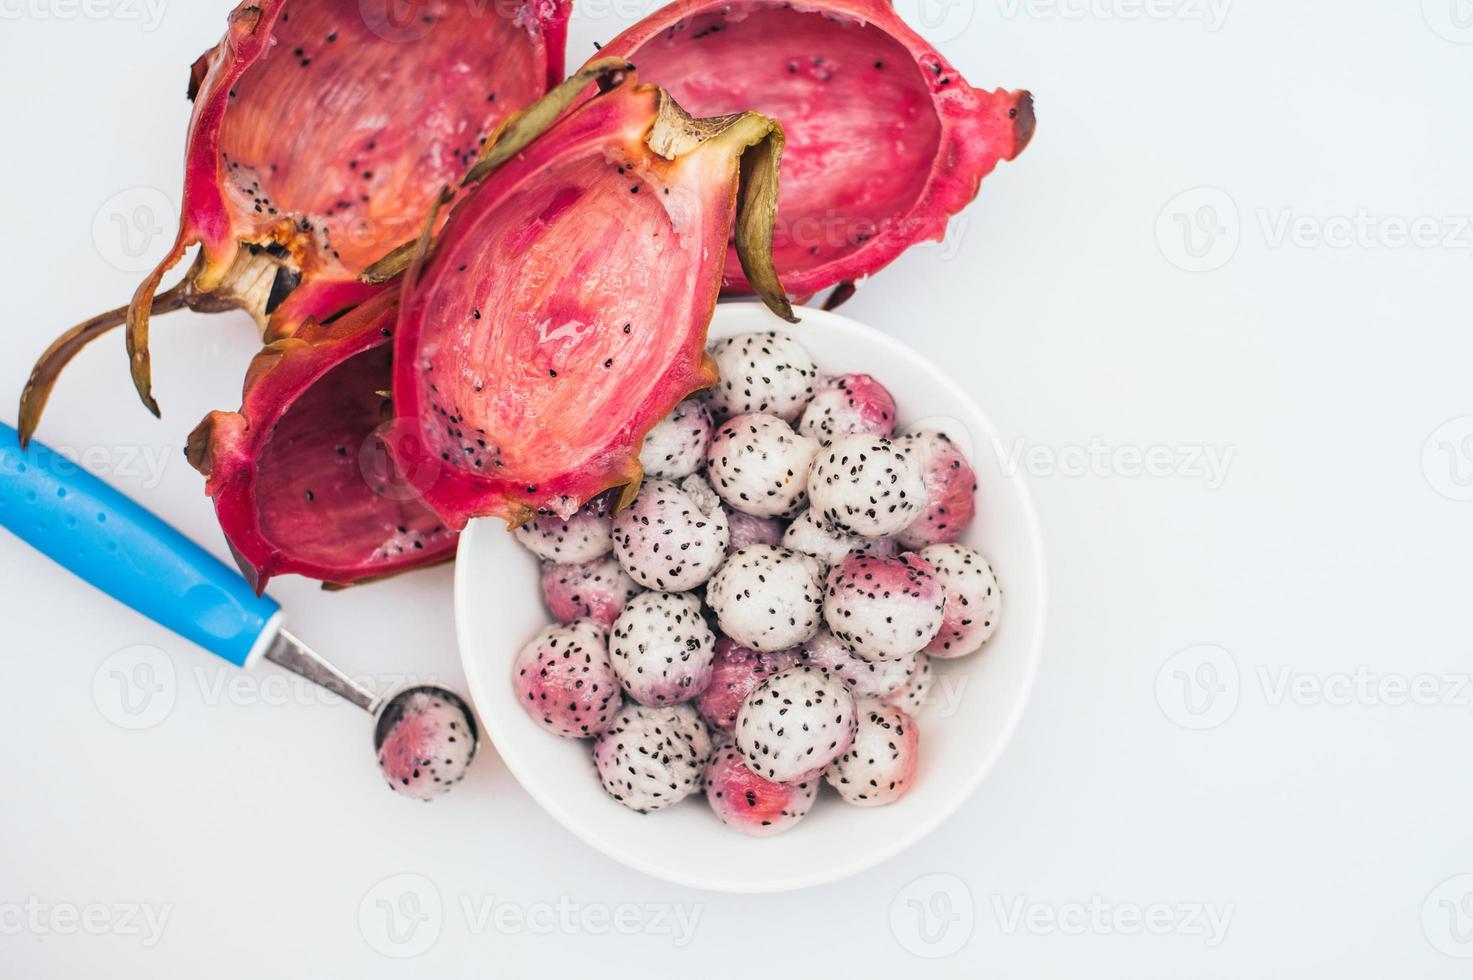 Pitahaya crafted in balls on white background. Sliced tropical fruit. Dessert serving. Carved fruit. Dragon fruit balls. Bright colors. Healthy nutrition concept photo